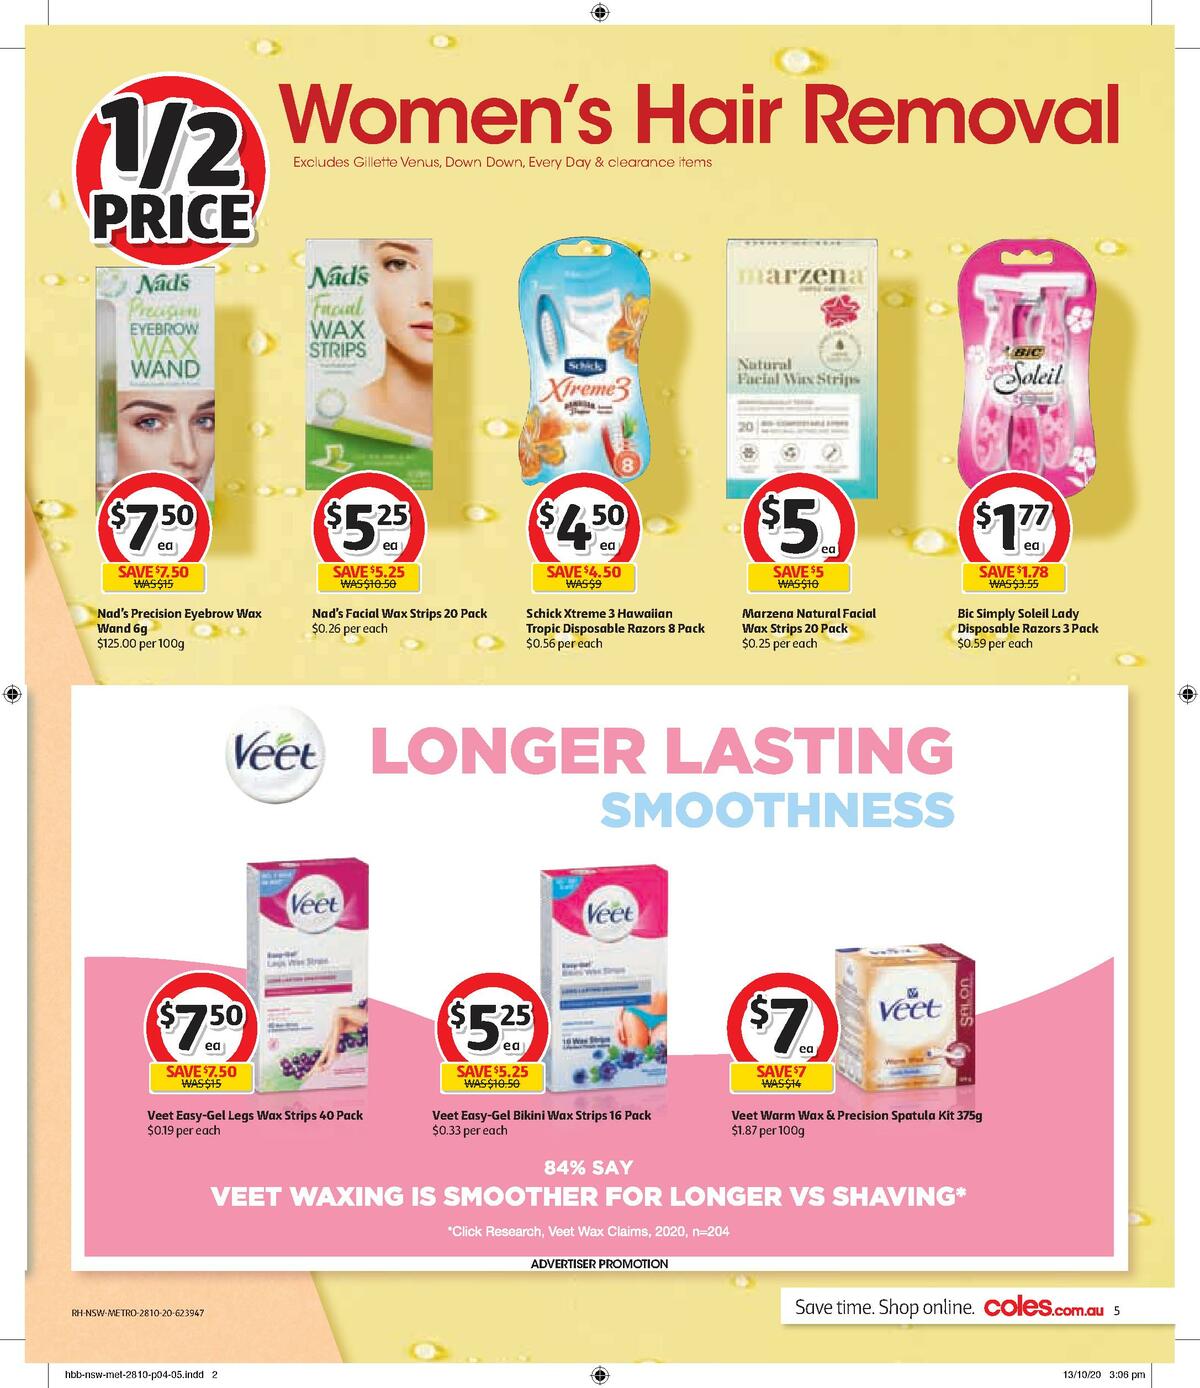 Coles Health & Beauty Catalogues from 28 October